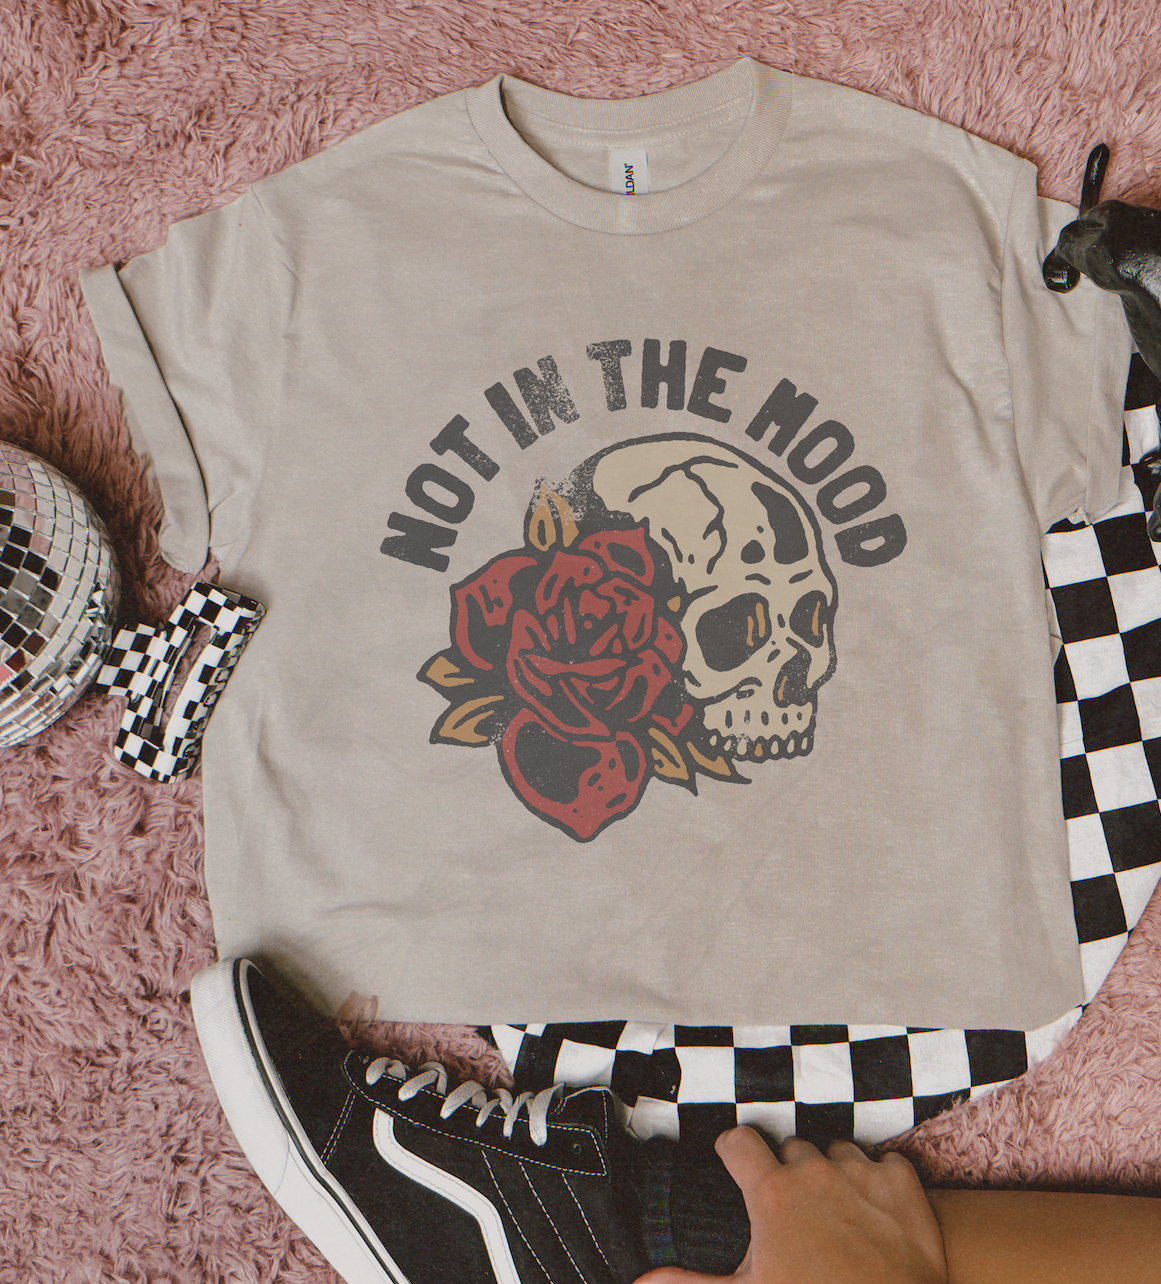 Not In The Mood Shirt